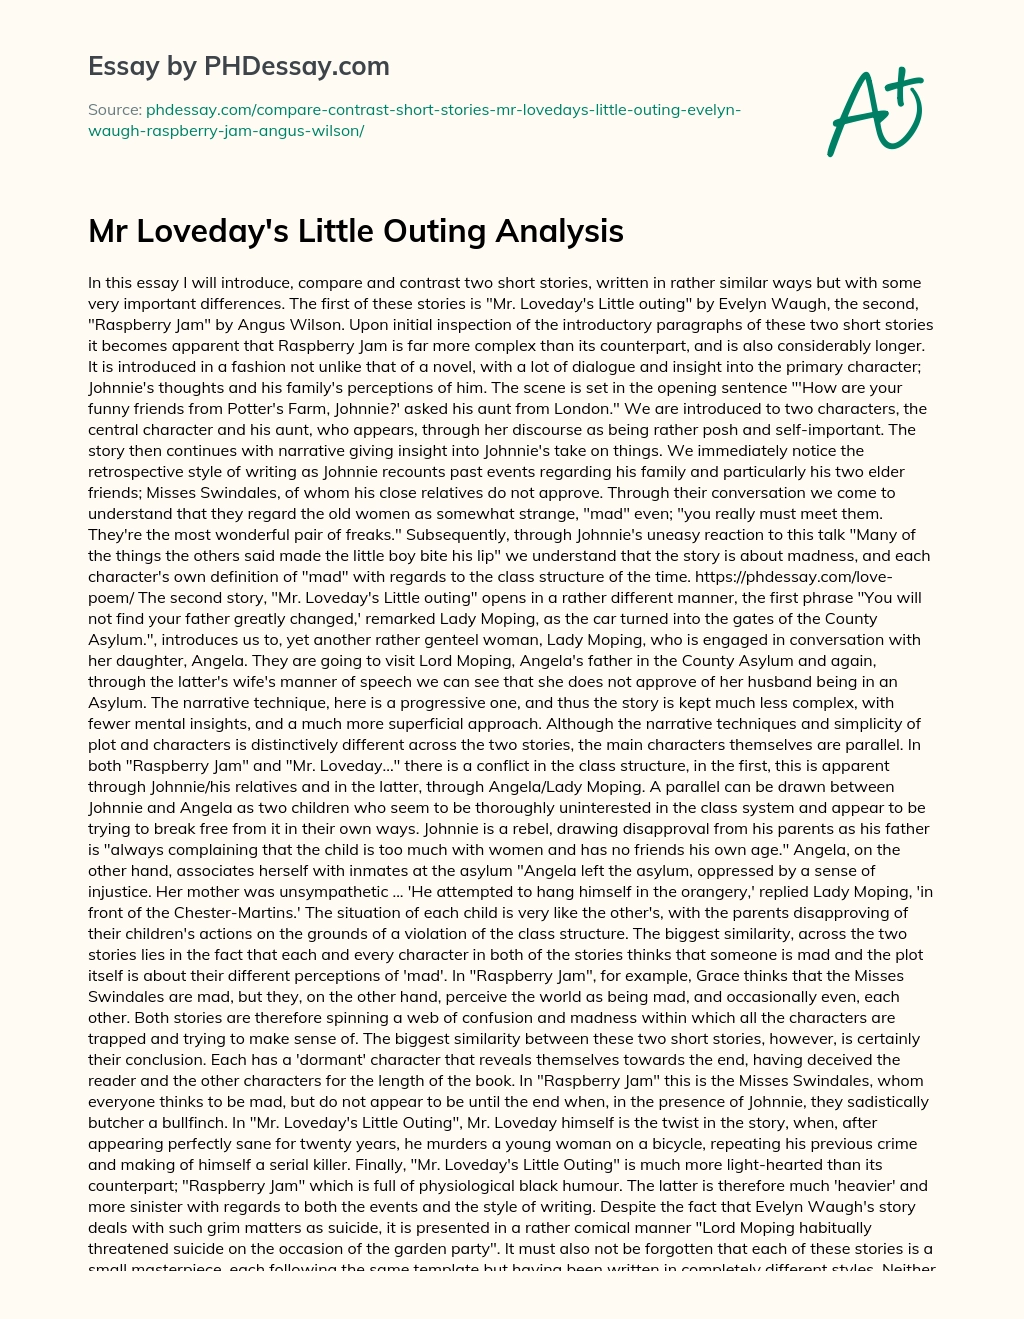 Mr Loveday’s Little Outing Analysis essay